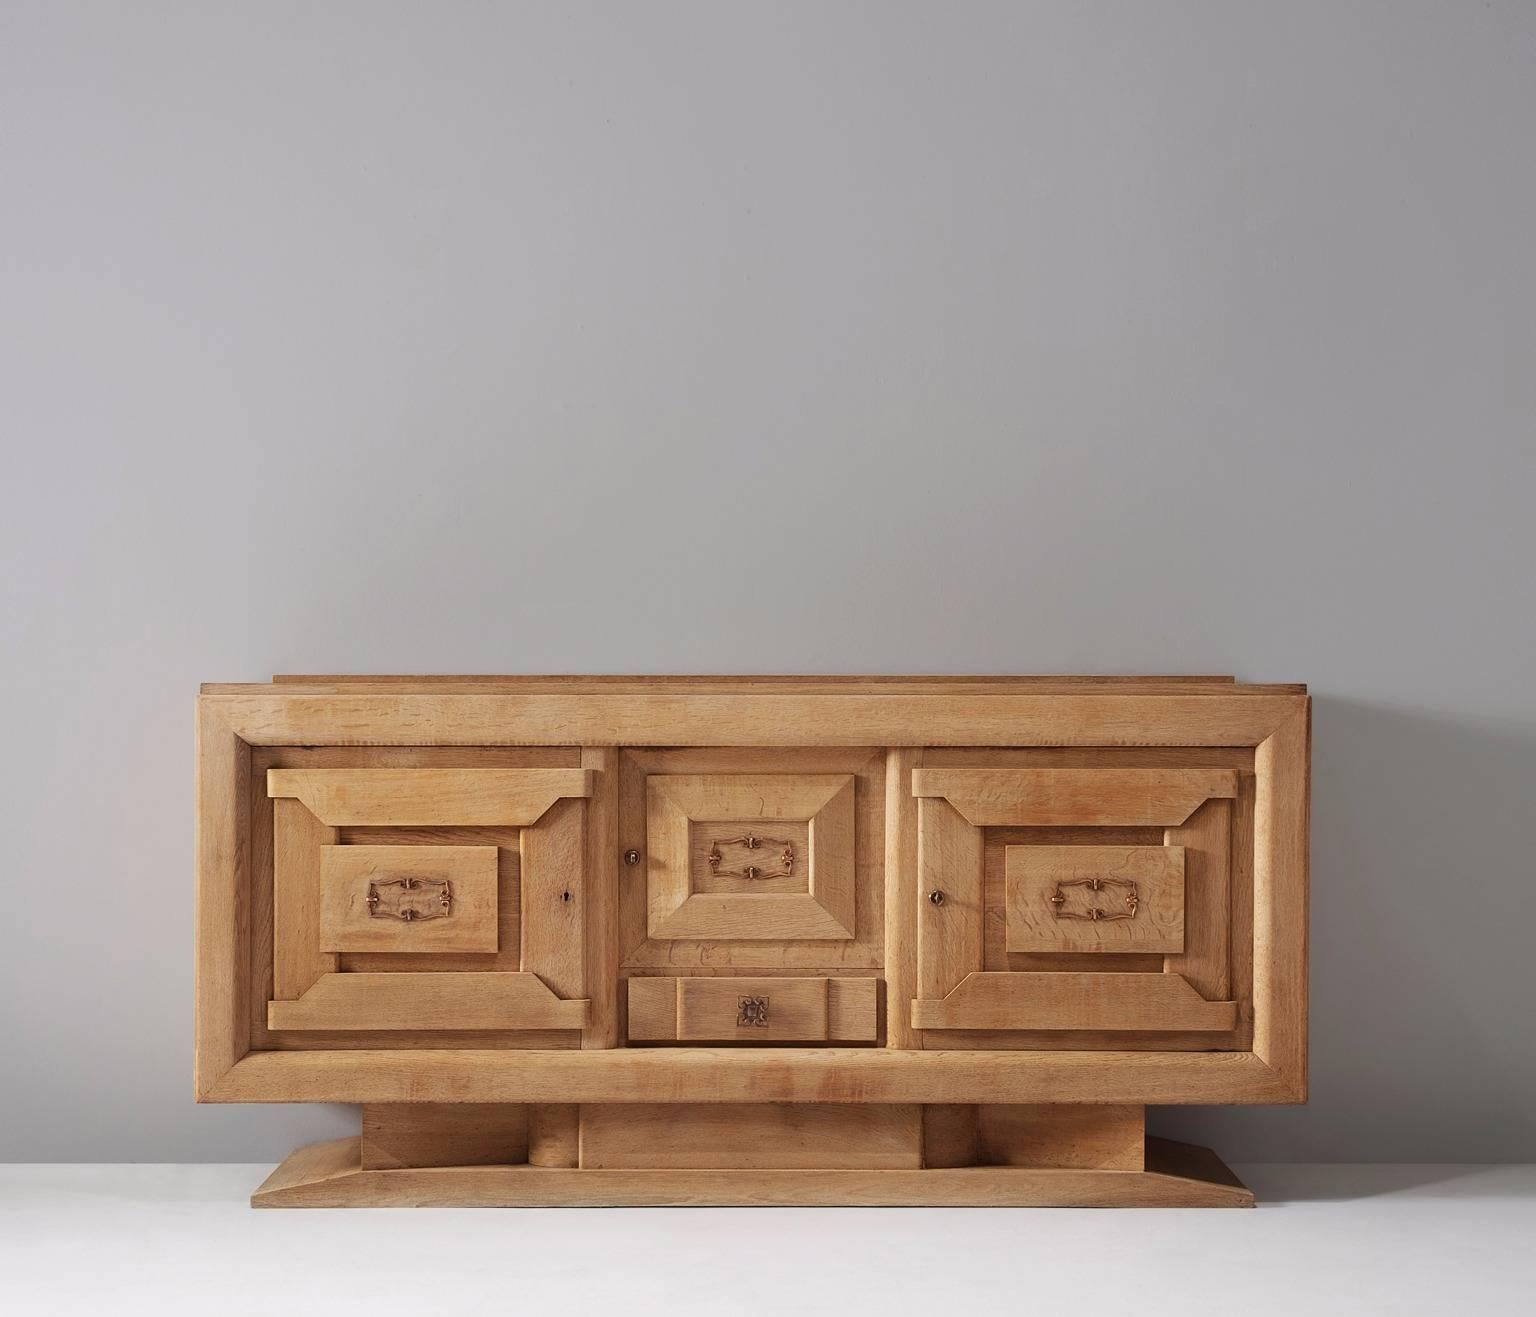 Credenza in oak, by Charles Dudouyt, France, 1930s. 

French Art Deco oak credenza designed by the decorator Charles Dudouyt. The solid wooden frame gives this sideboard a sturdy character. The door panels show an interesting pattern of solid